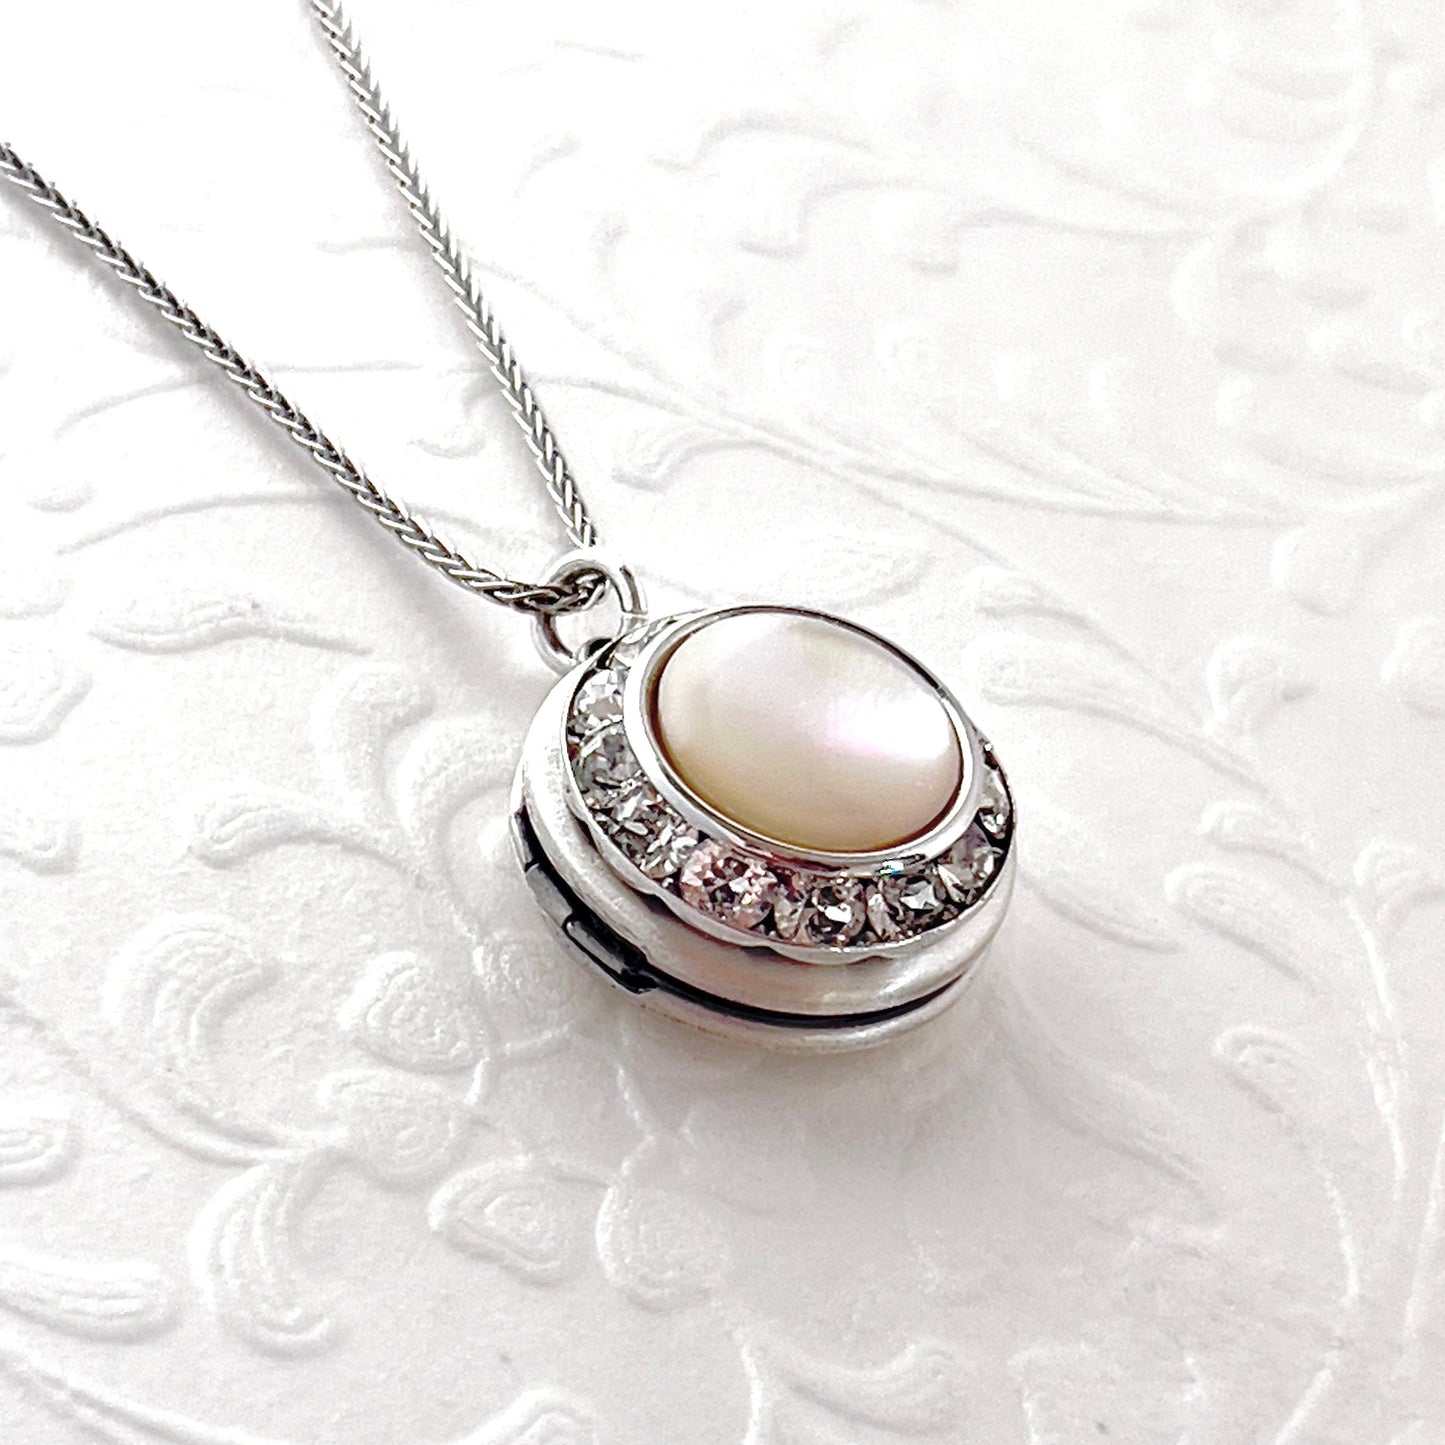 Adjustable Photo Locket Necklace, Unique Graduation Gift for Her, Crystal and Mother of Pearl Jewelry